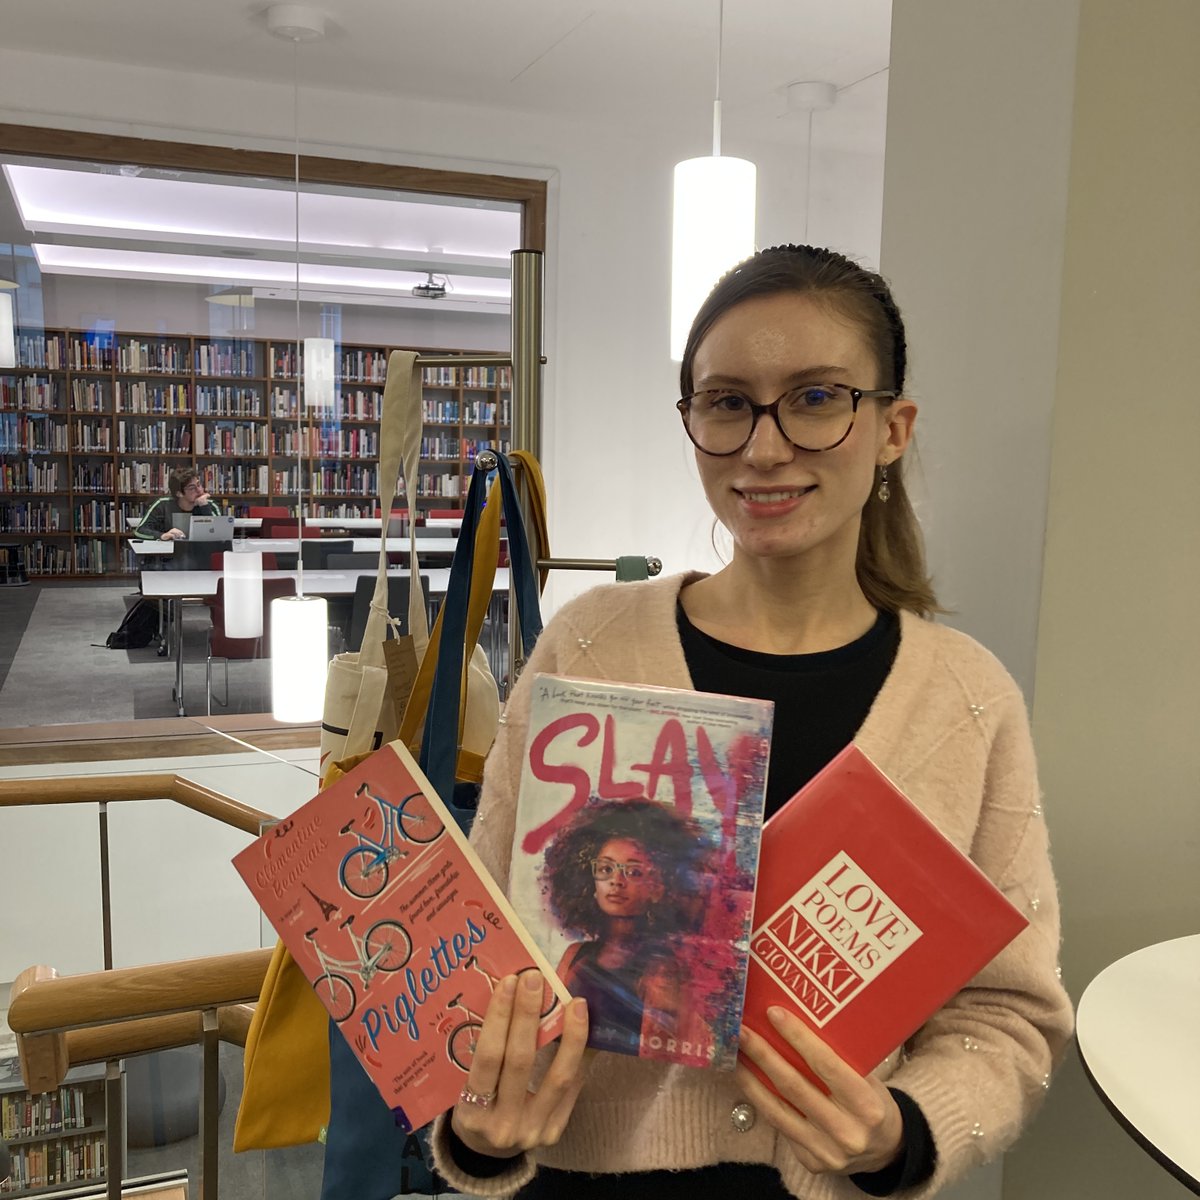 This week, the Library team is highlighting hidden gems from the stacks 💎📚 From love poetry to graphic novels, our staff members have picked a broad range of books that they think you should know about! #americanlibraryinparis